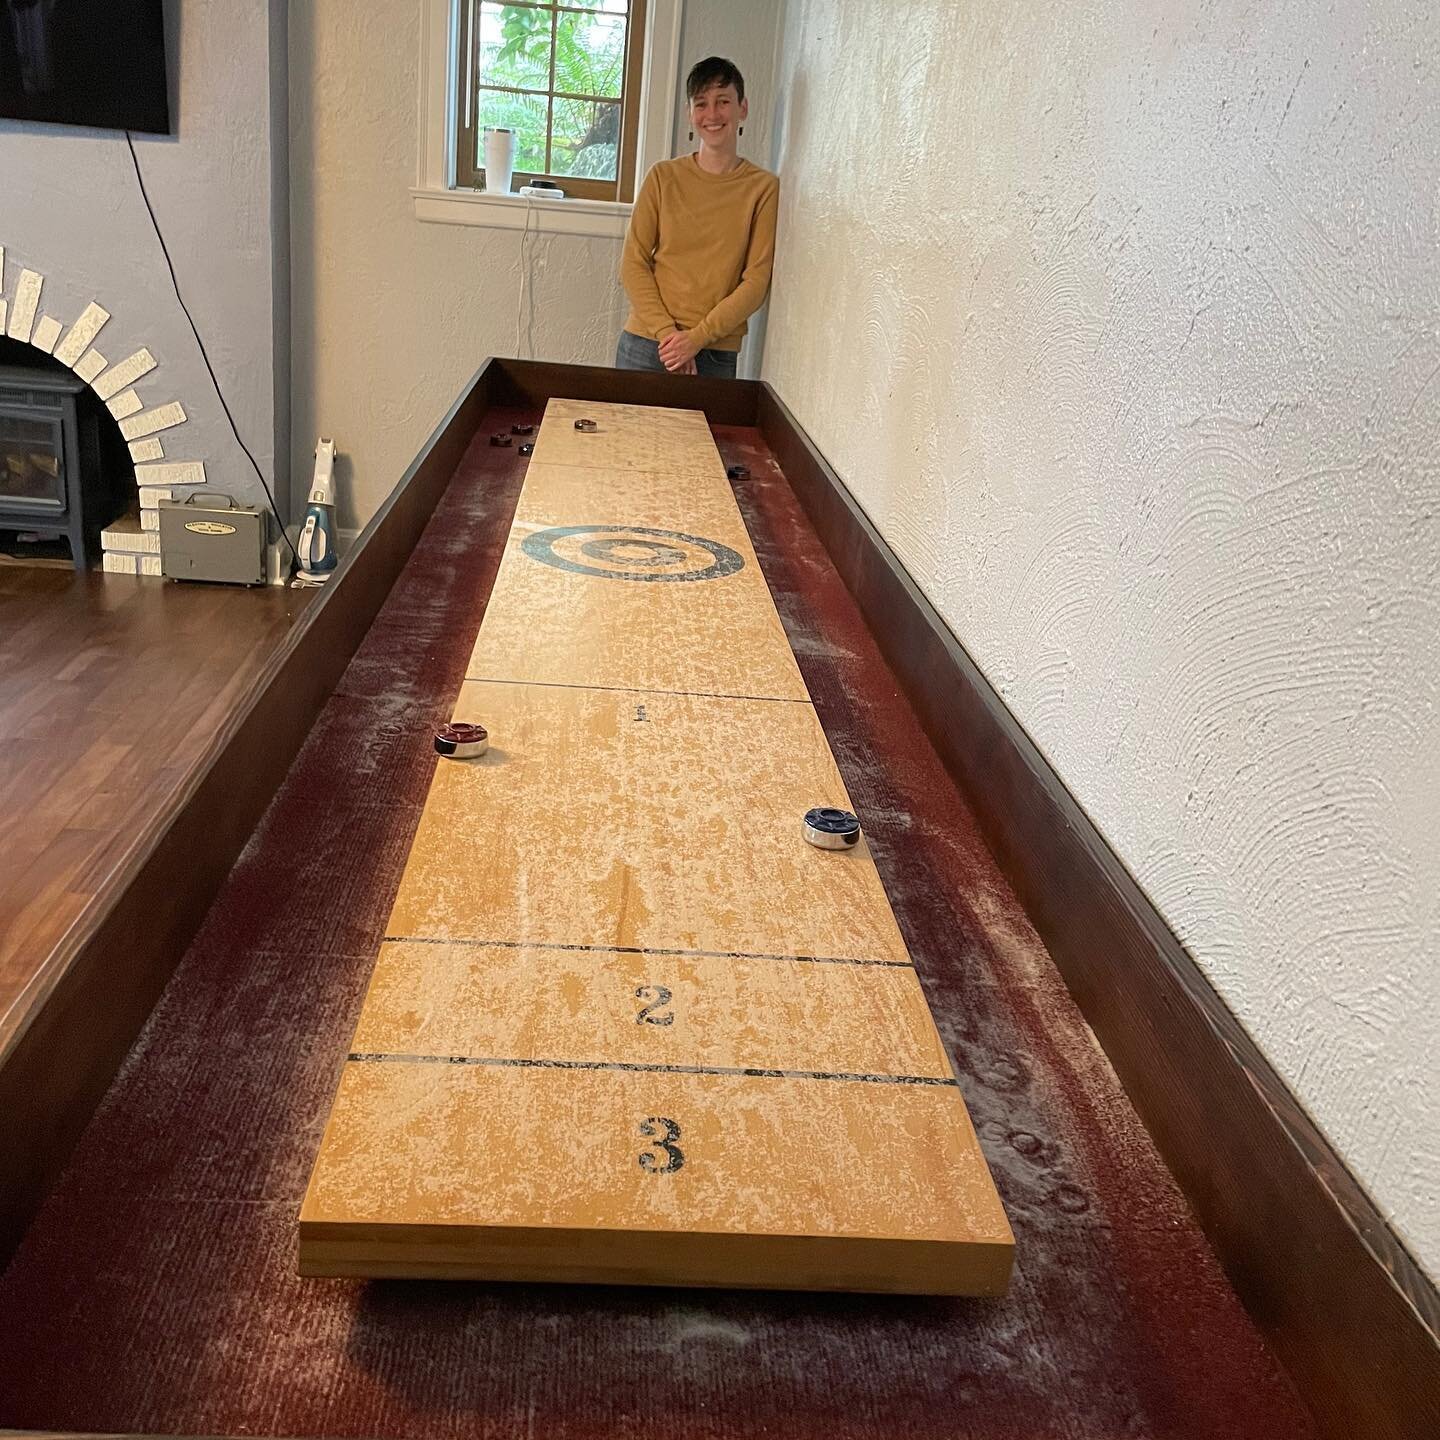 This is the project that started it all. My first venture into woodworking!
My partner and I wanted a shuffleboard table but we didn&rsquo;t want to buy one so I figured I&rsquo;d try my hand at building one. My background in Prosthetics &amp; Orthot